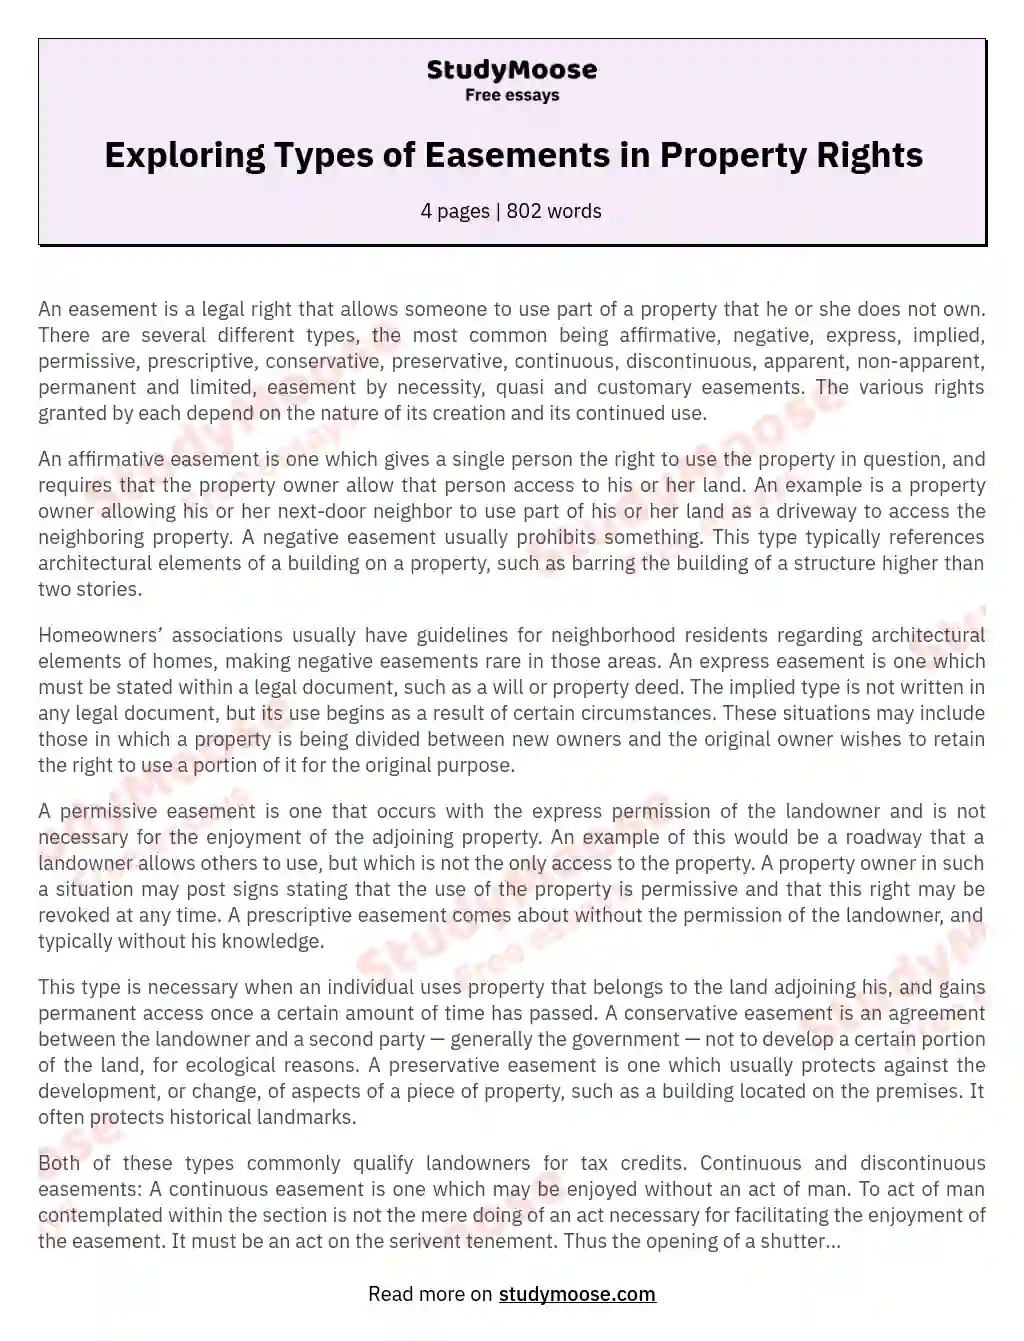 Exploring Types of Easements in Property Rights essay